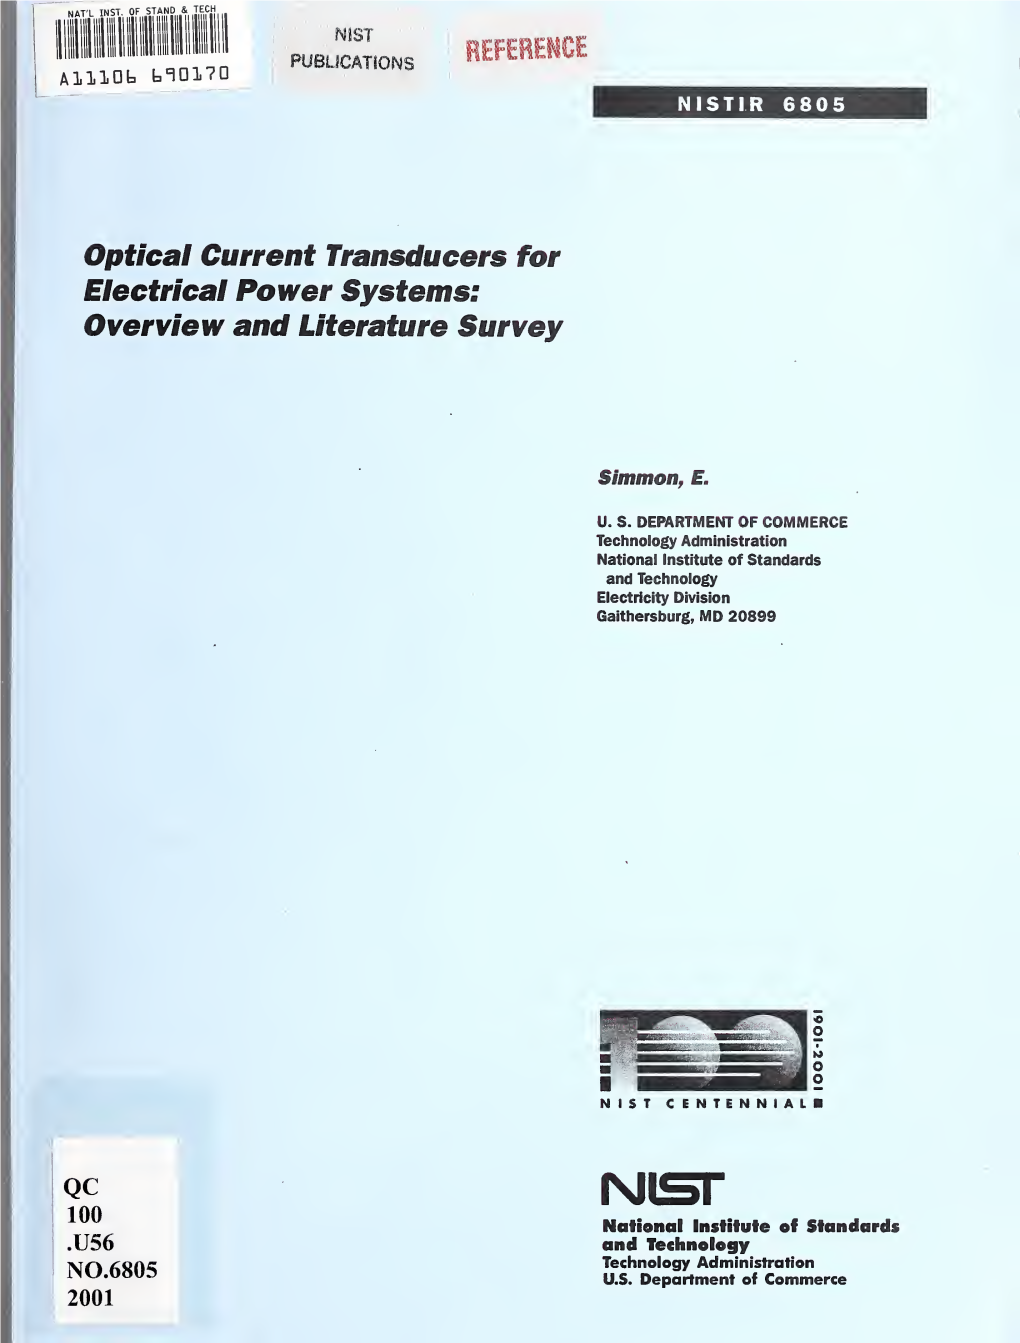 Optical Current Transducers for Electrical Power Systems: Overview and Literature Survey